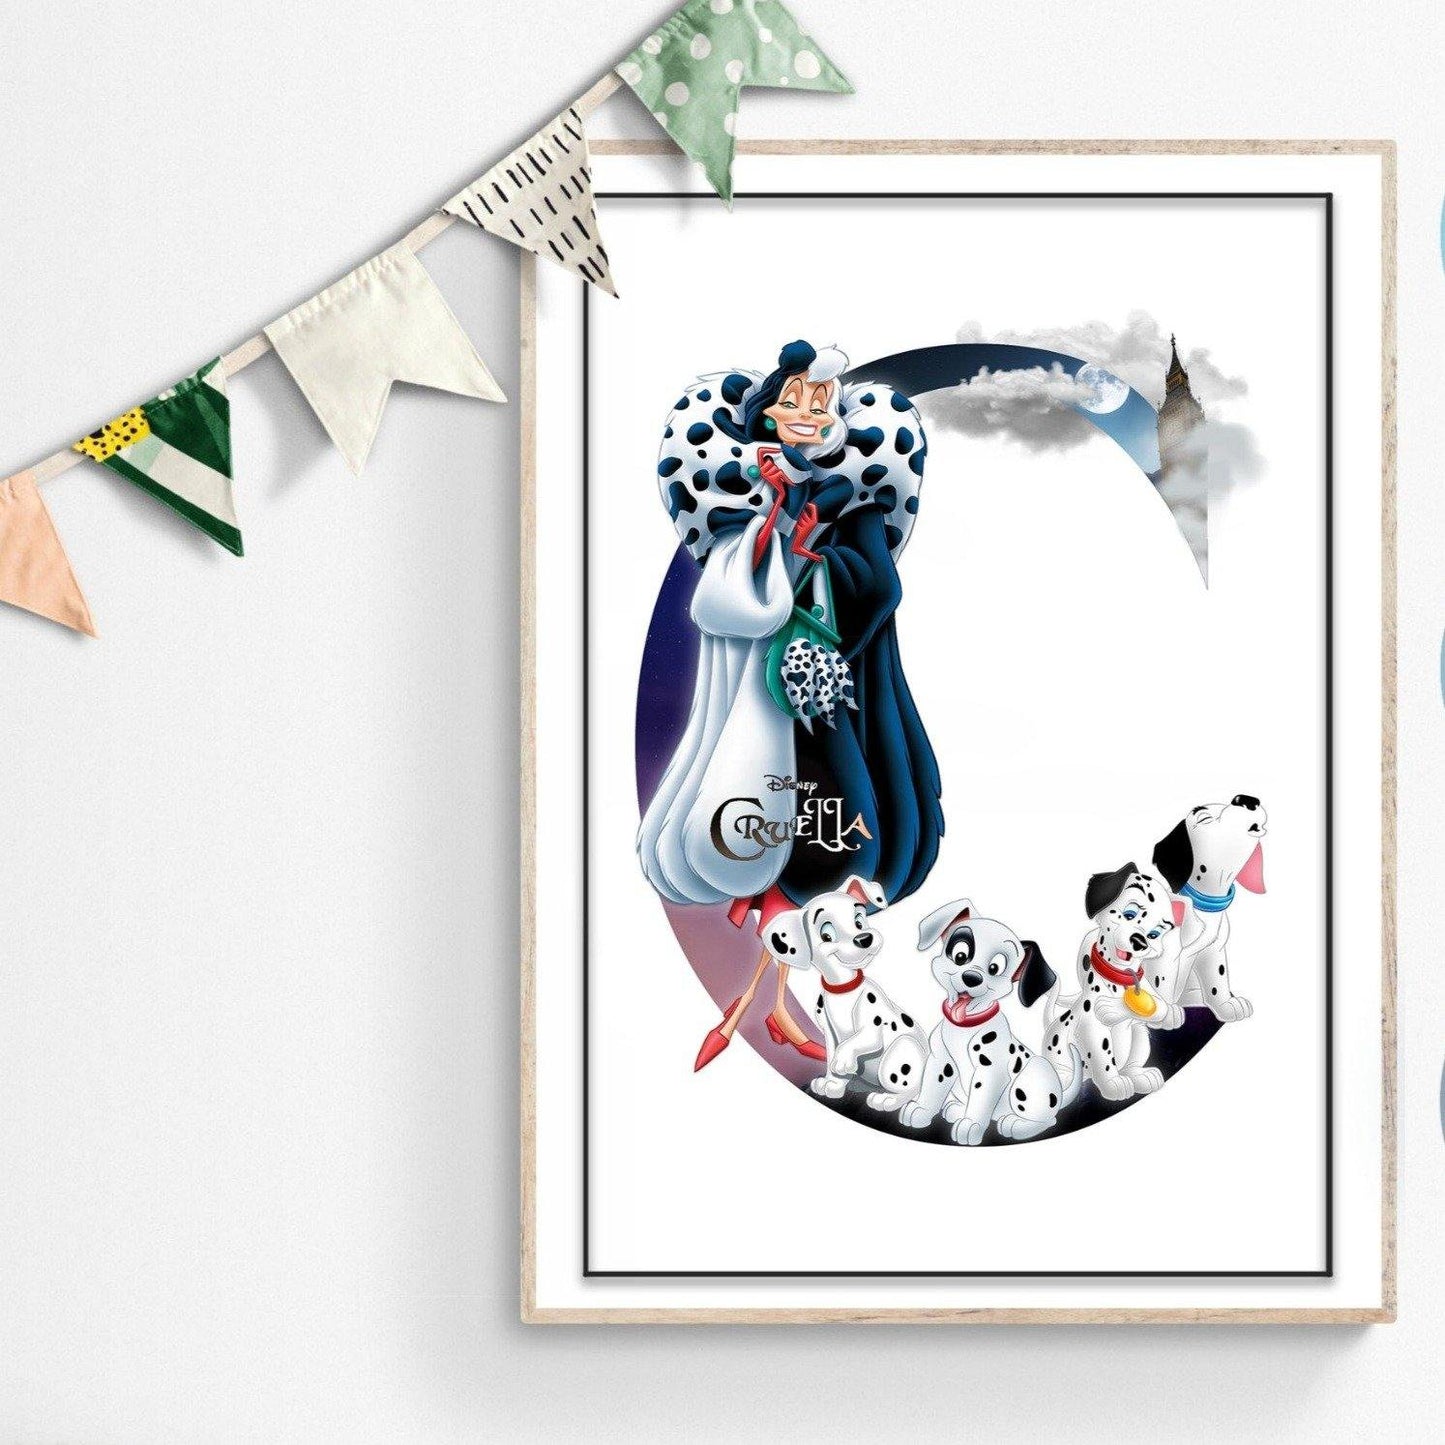 This Cruella de Vil Movie Poster is perfect for celebrating your favourite Disney movies! It features original typography from the movie, handmade poster illustrations, and vibrant Disney movie princess posters. With the best selection of posters, gifts, prints, wall murals, and fine art prints, you'll love decorating your room walls with these iconic Disney characters! 98types